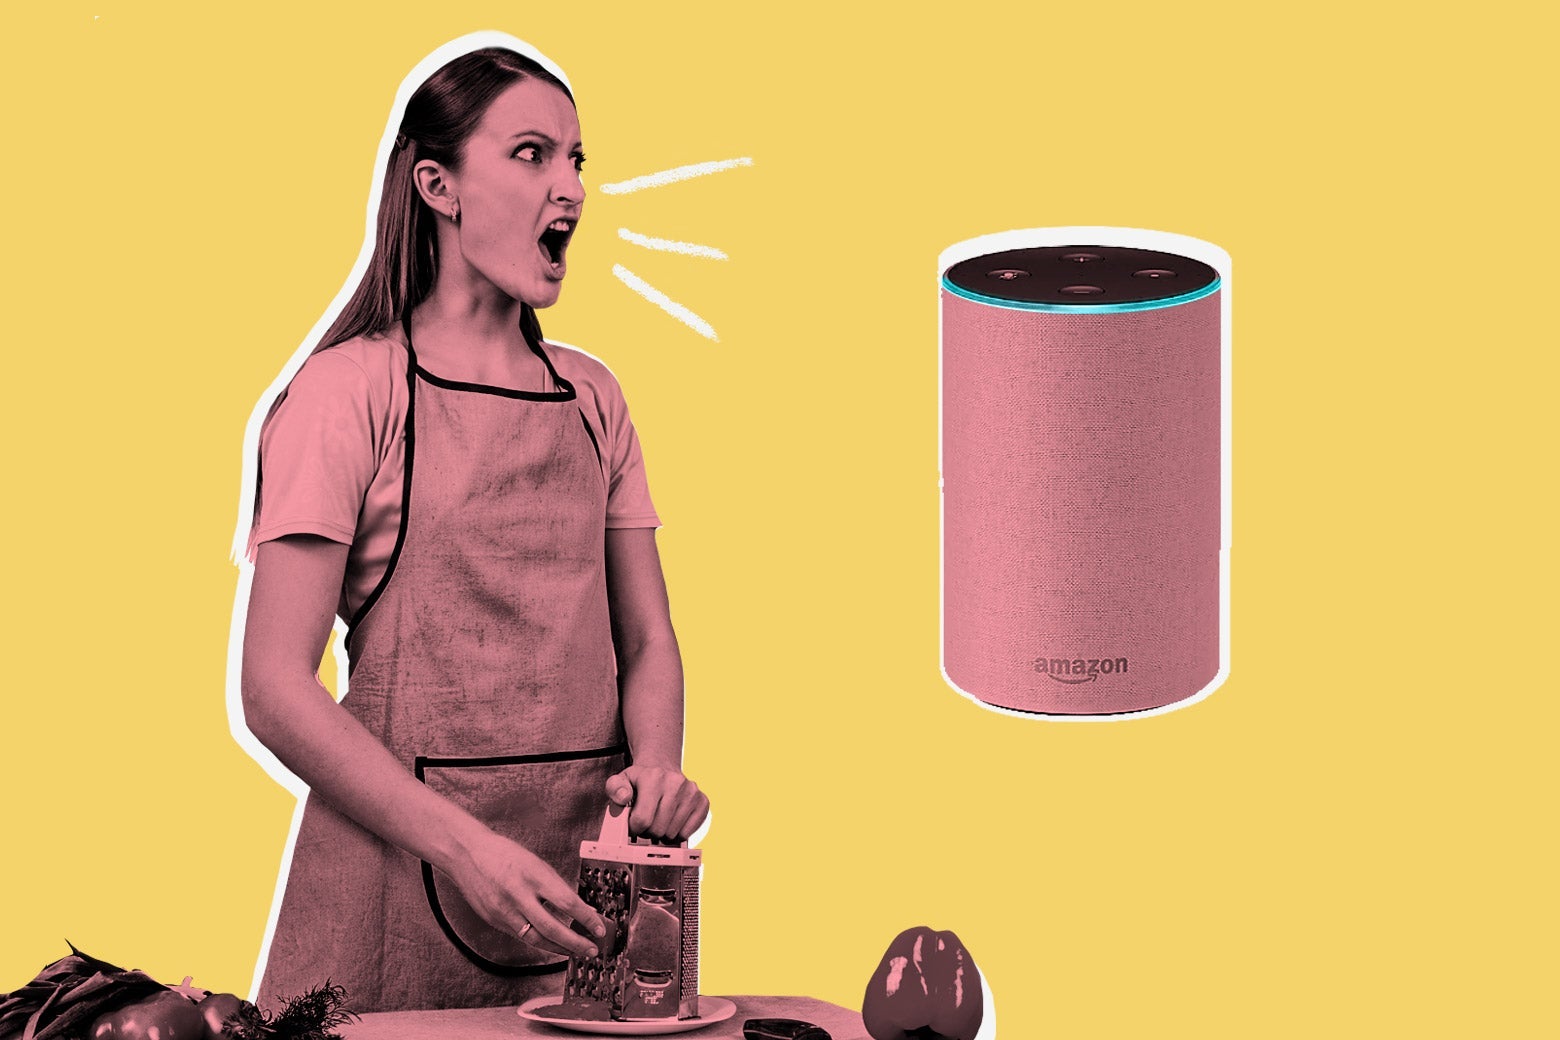 A woman in an apron yells at an Amazon Echo